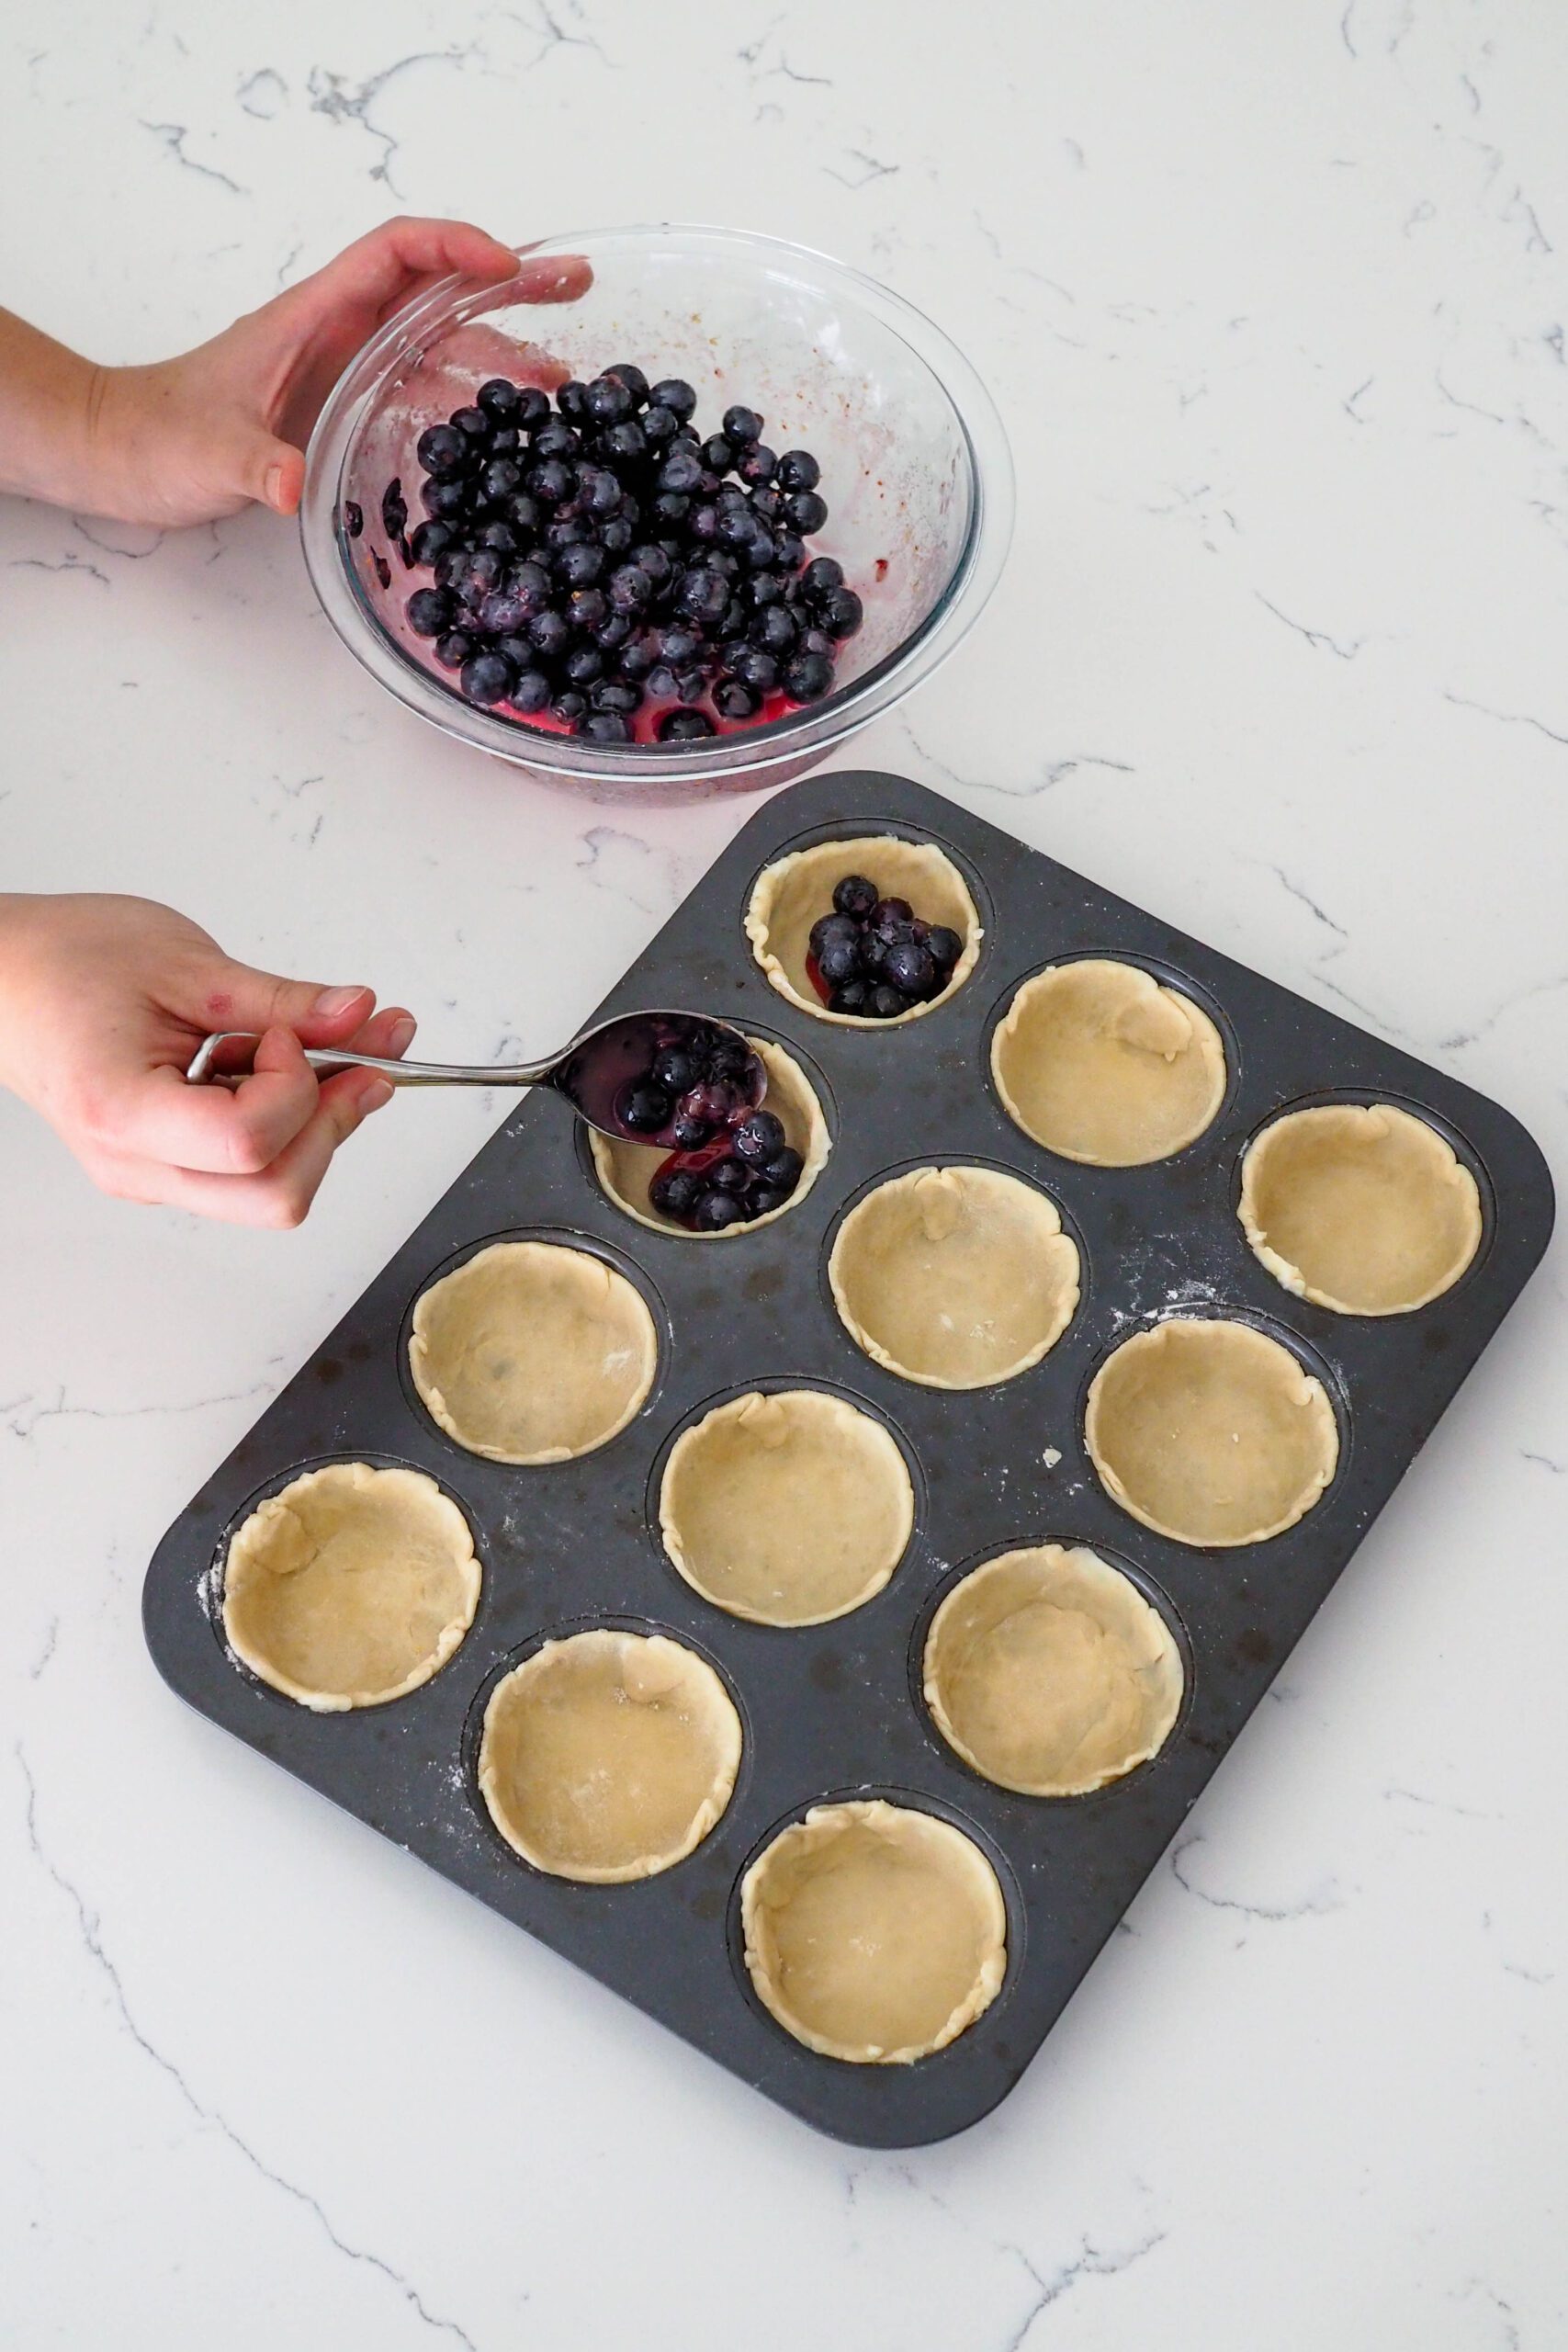 A hand spoons blueberry pie filling into mini blueberry pie shells.